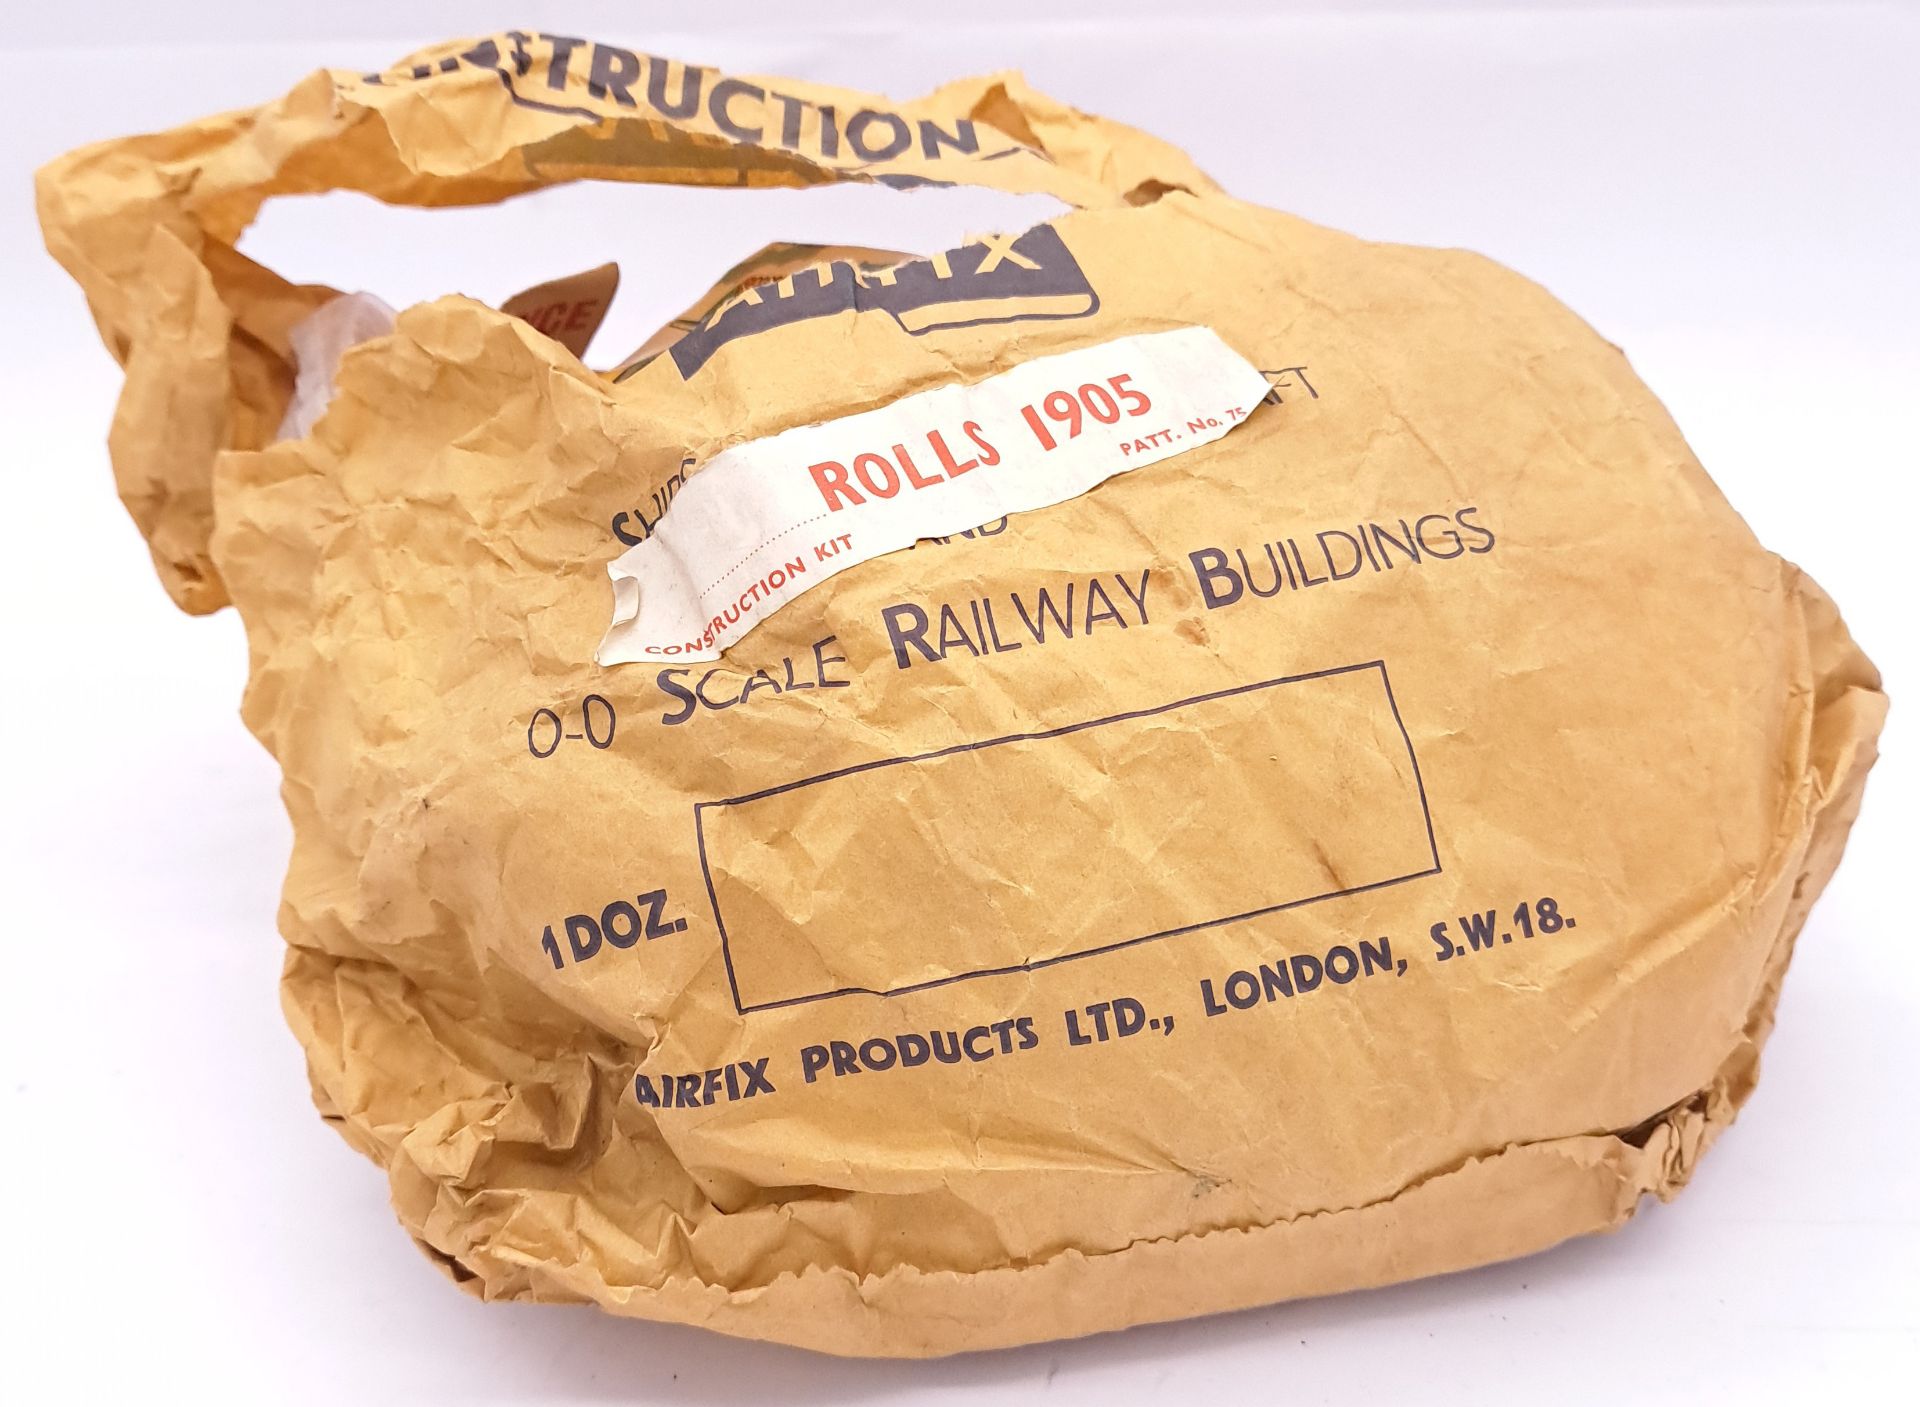 Airfix c1960’s ORIGINAL TRADE BAG complete with Bagged “1905 Rolls-Royce” - Image 5 of 7